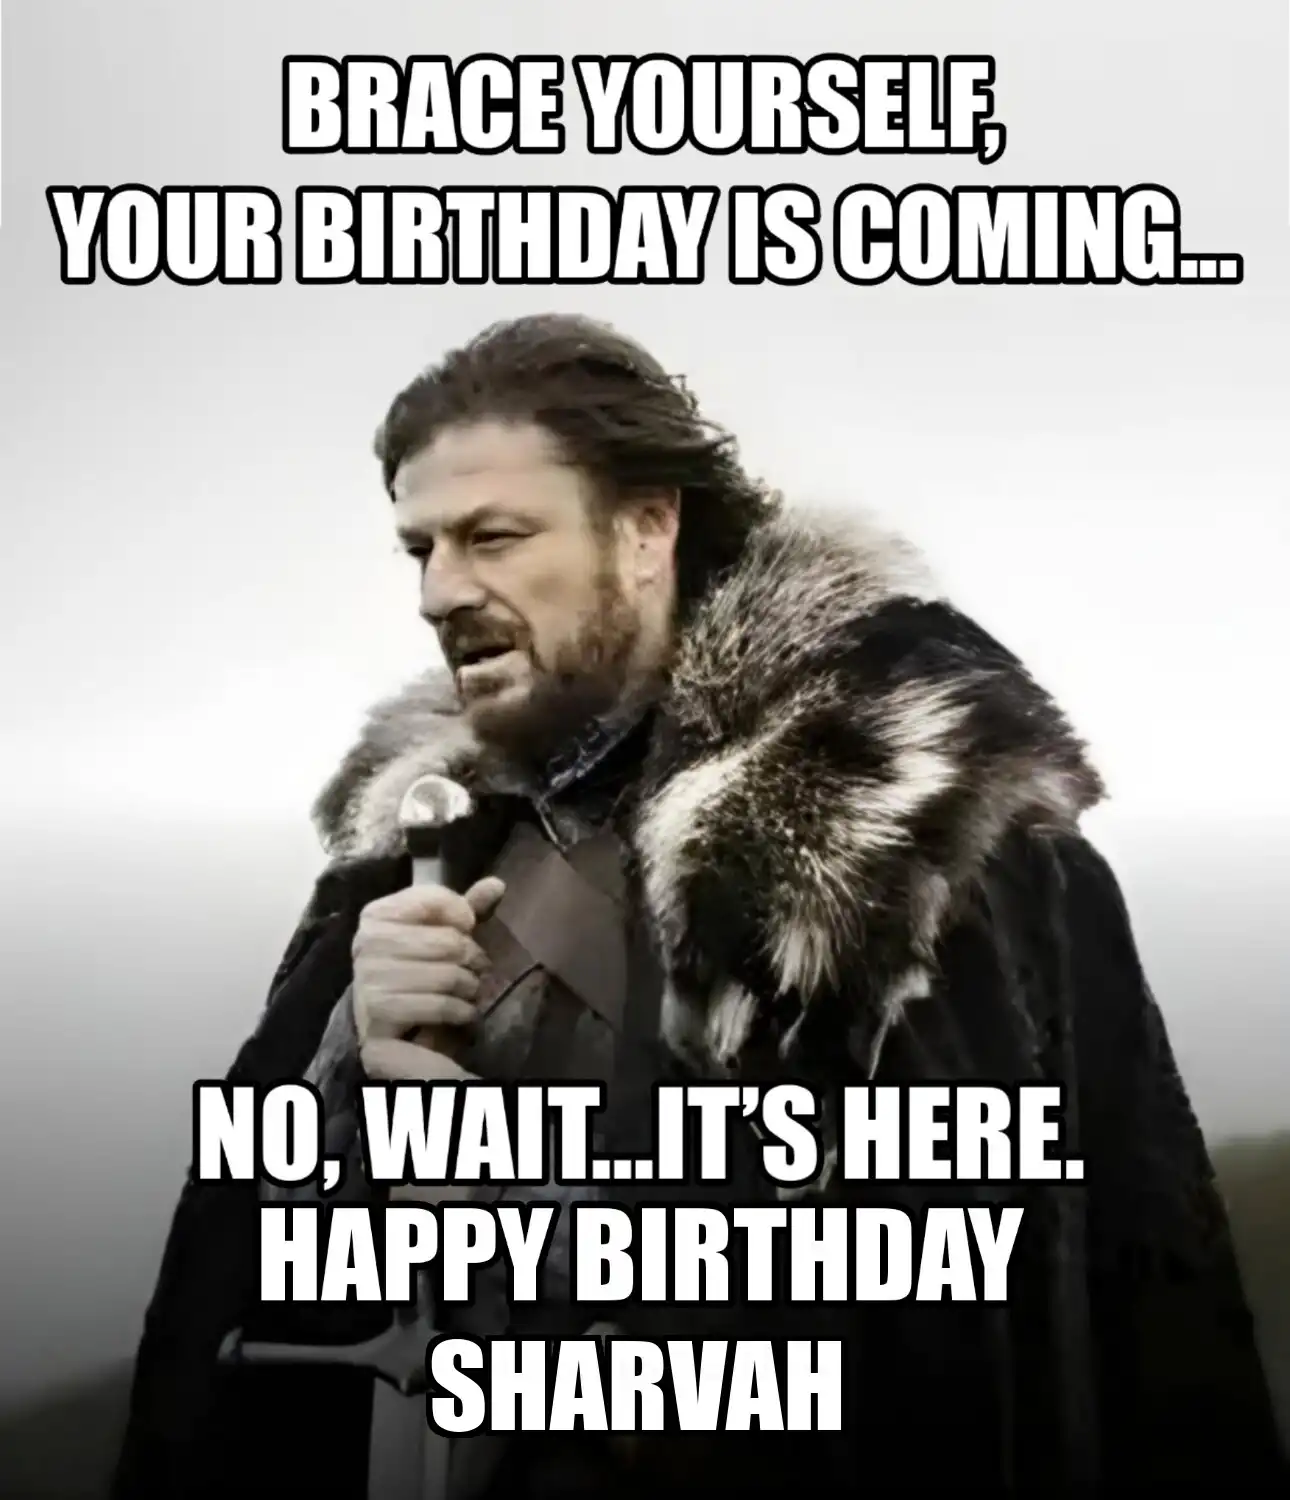 Happy Birthday Sharvah Brace Yourself Your Birthday Is Coming Meme